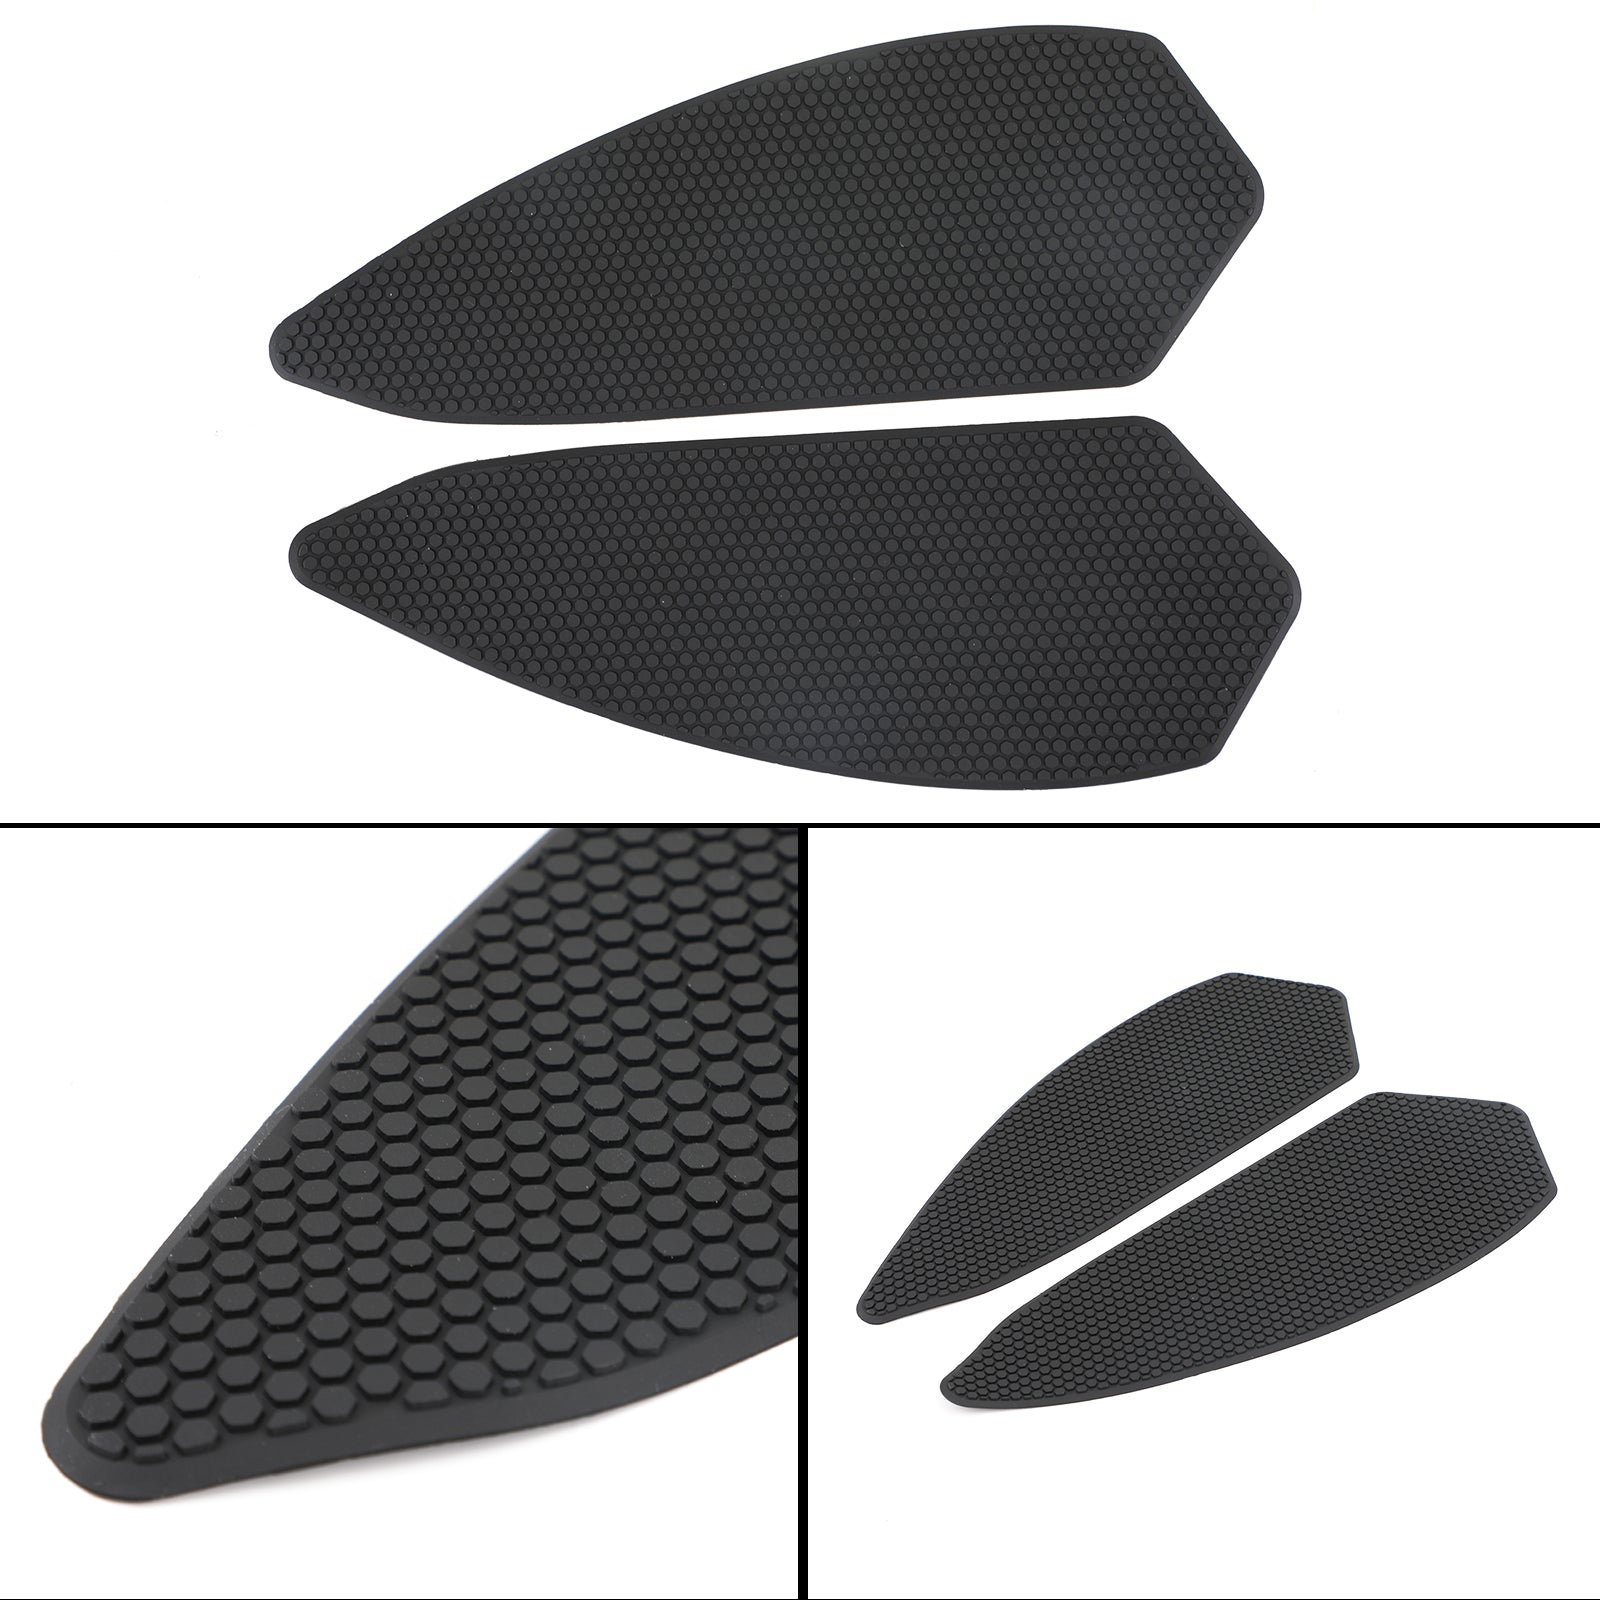 2020+ BMW S1000RR Sticky Traction Pads Tankgrips Tank Grips Black Generic